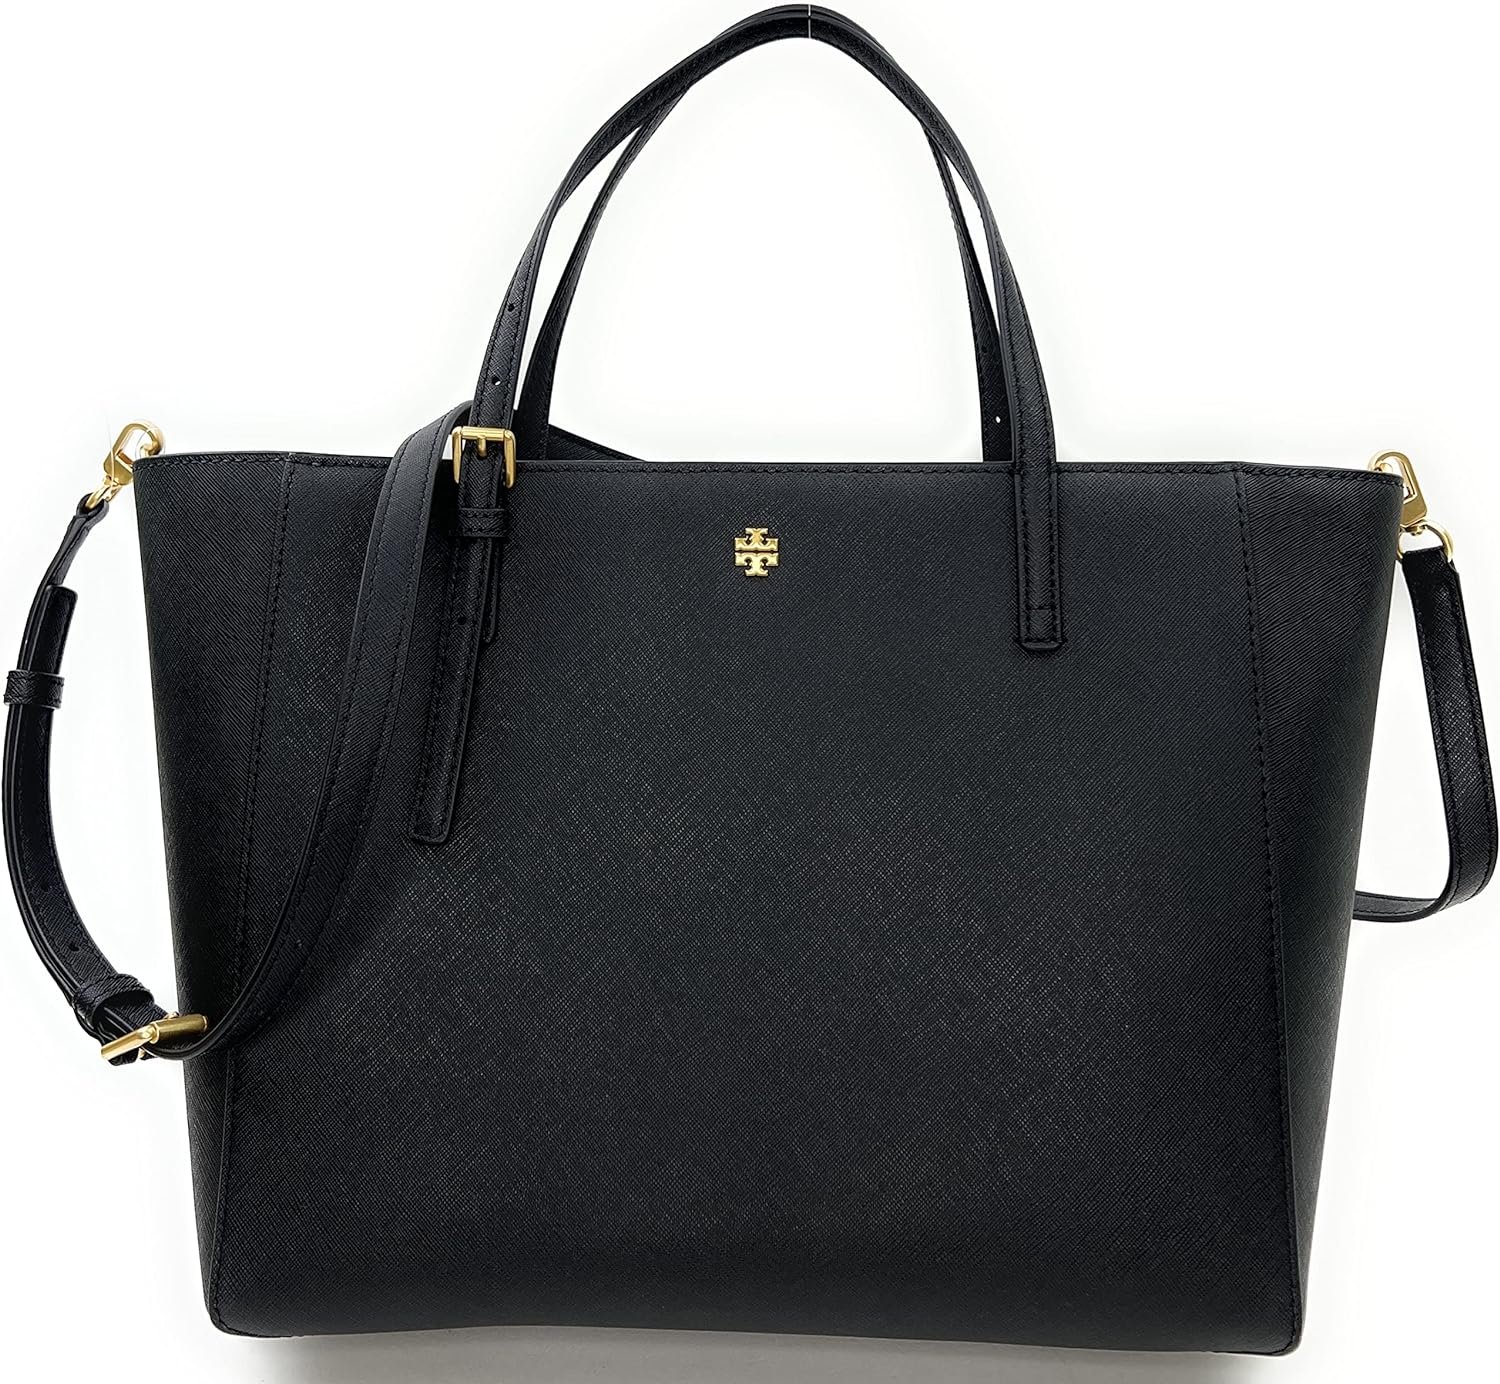 Tory Burch Emerson Leather Womens Tote (Black)